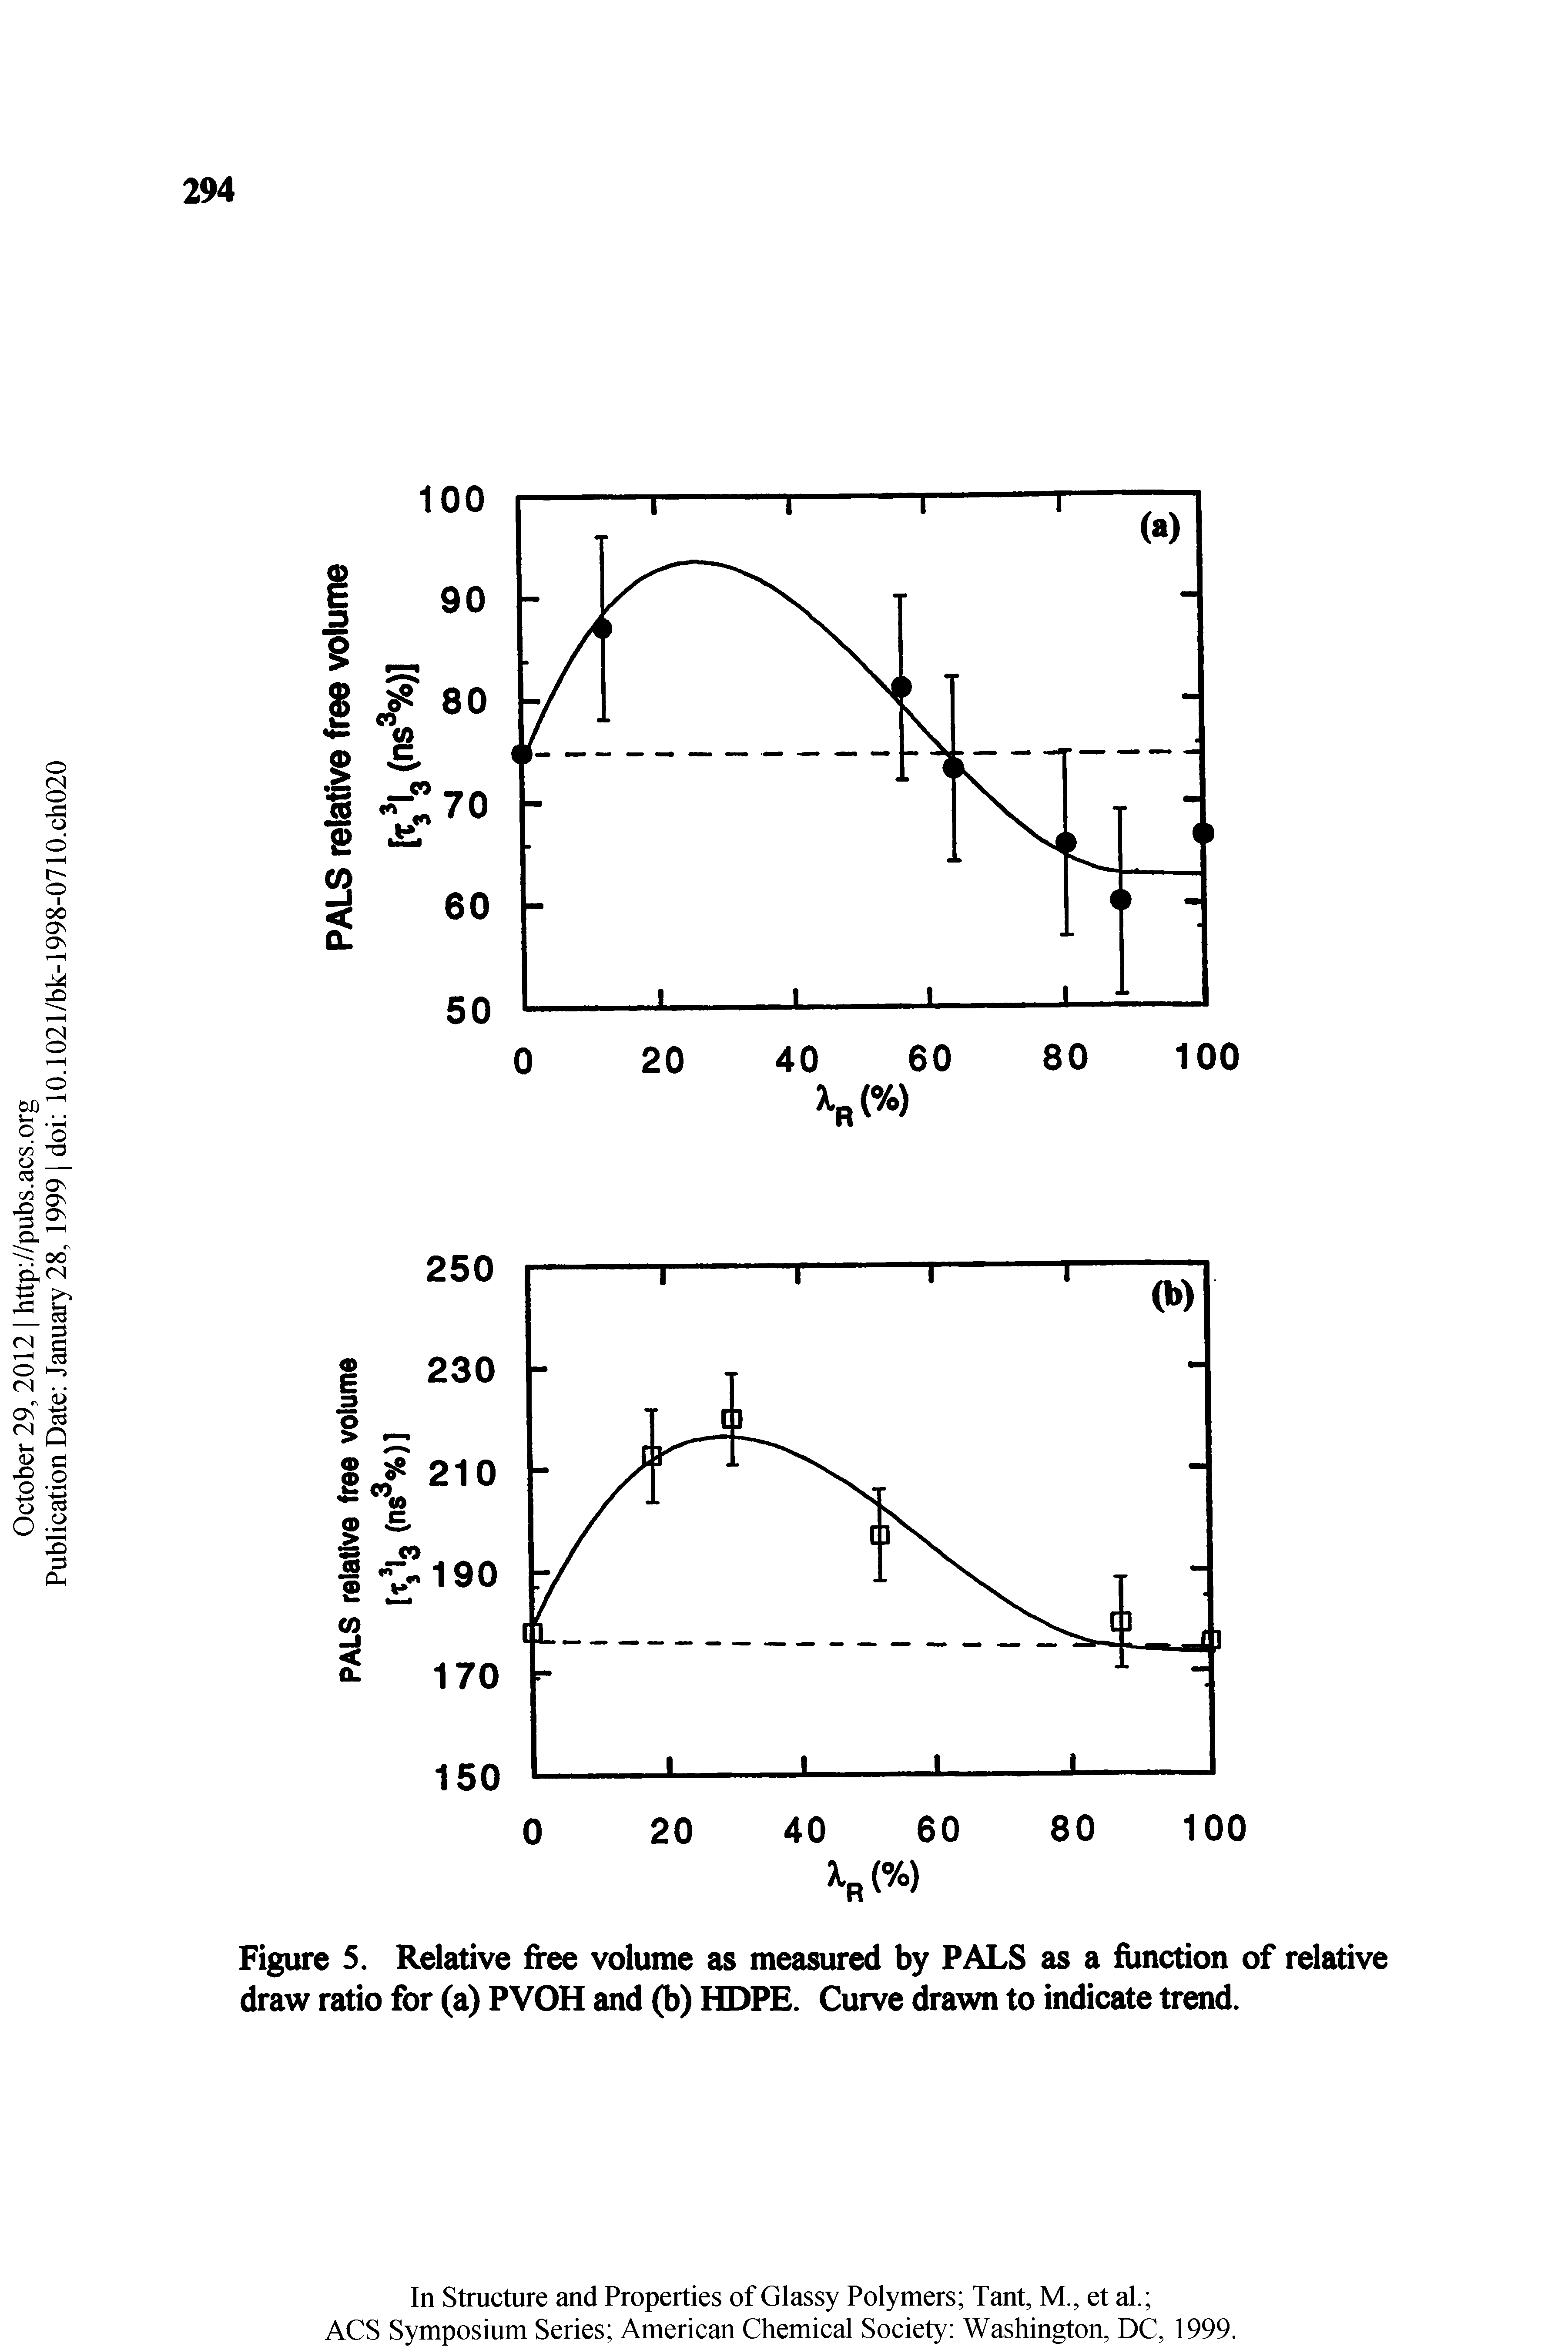 Figure 5. Relative free volume as measured by PALS as a function of relative draw ratio for (a) PVOH and (b) HDPE. Curve drawn to indicate trend.